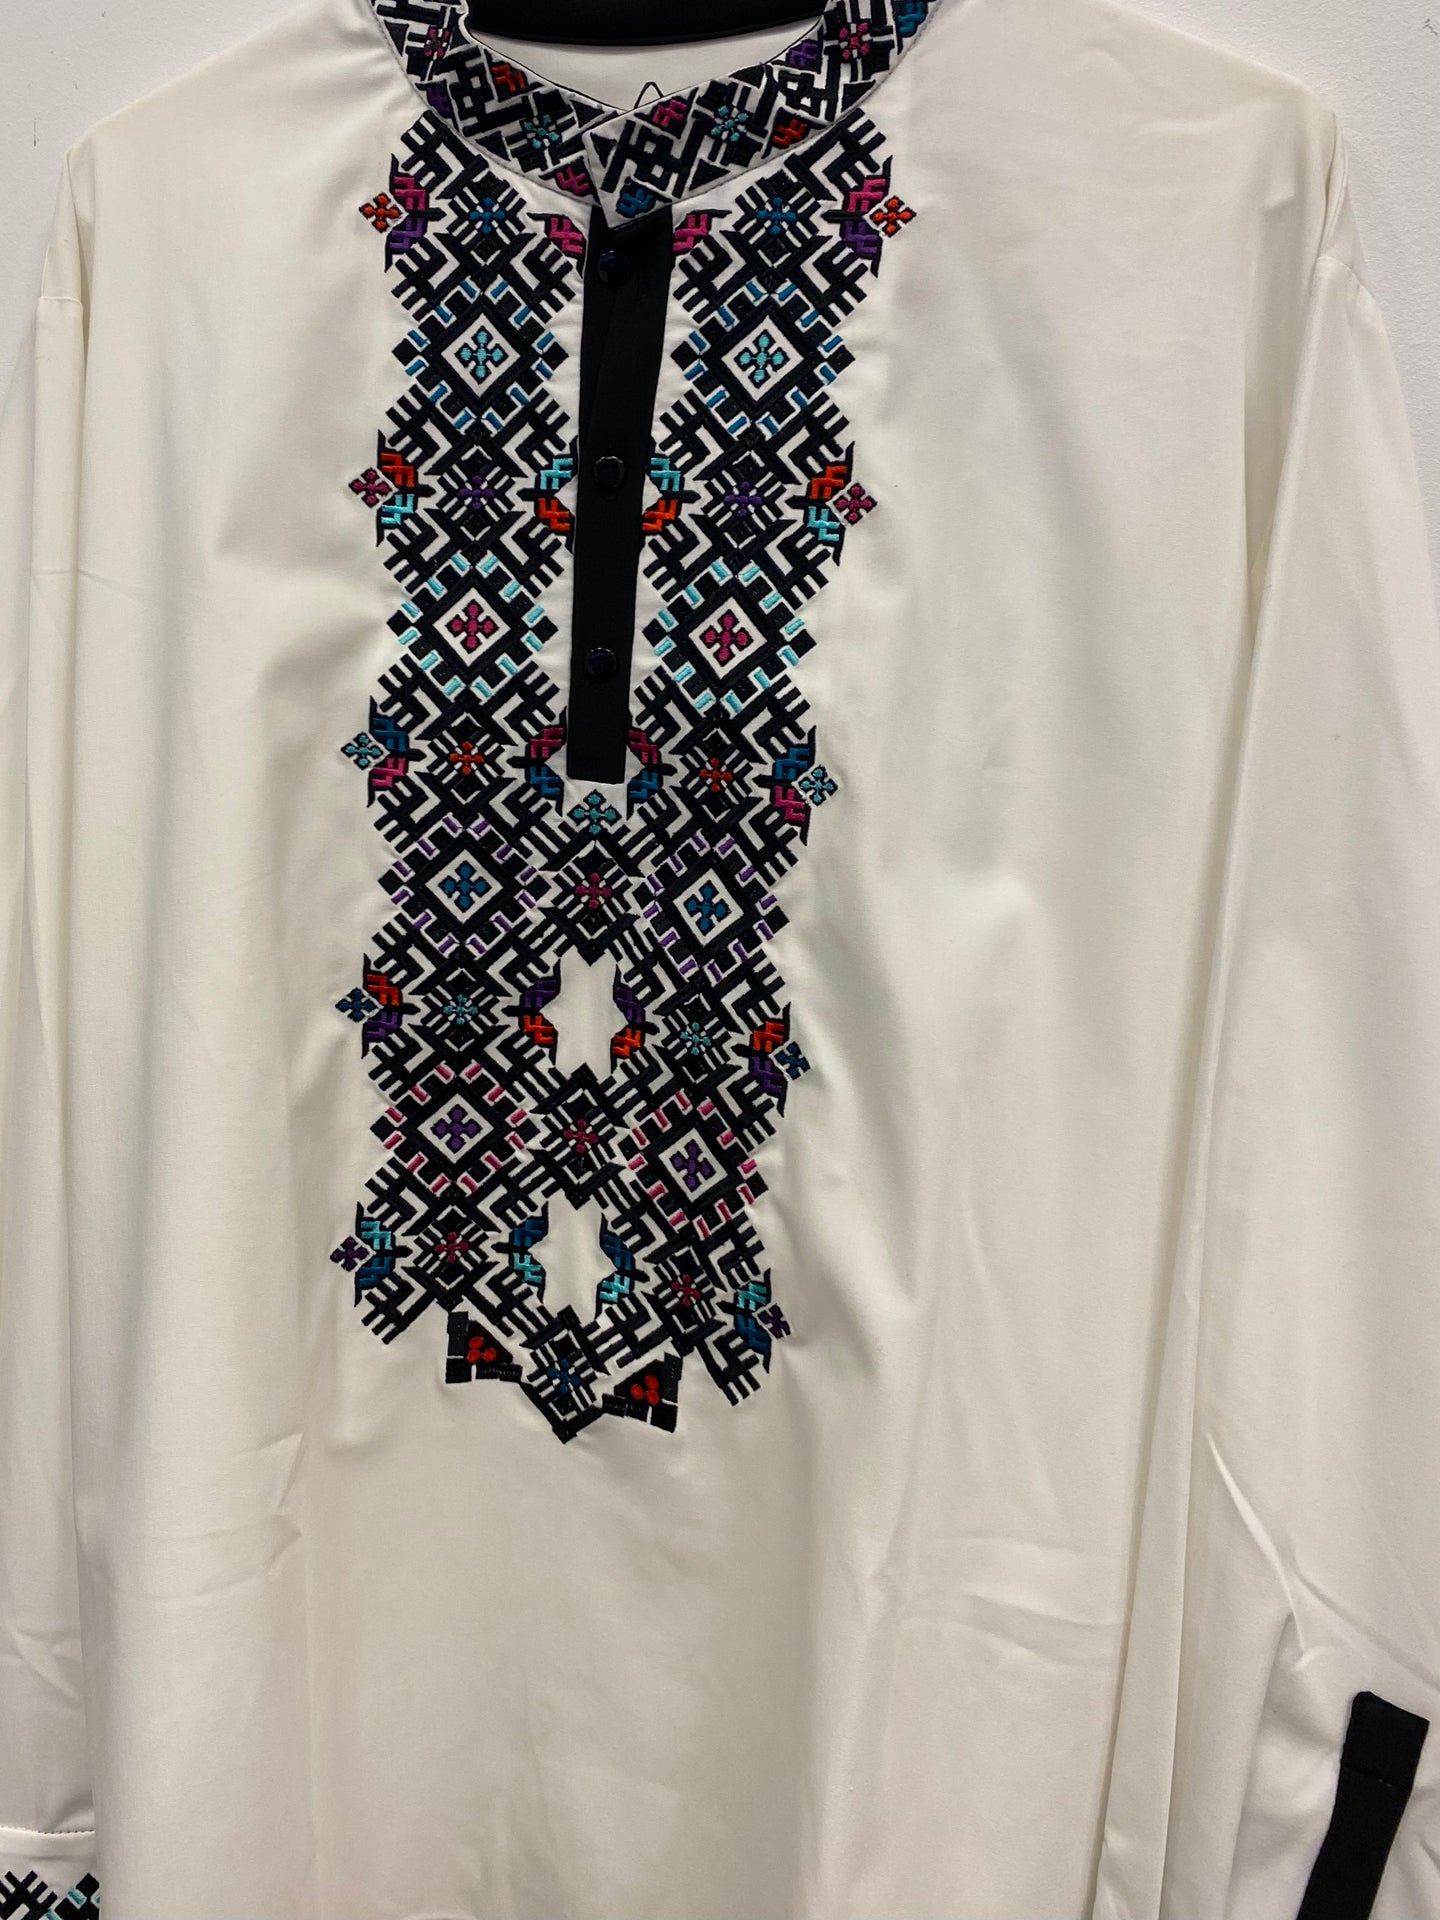 Mens Embroidered  Shirt  Made in Ukraine # 1007